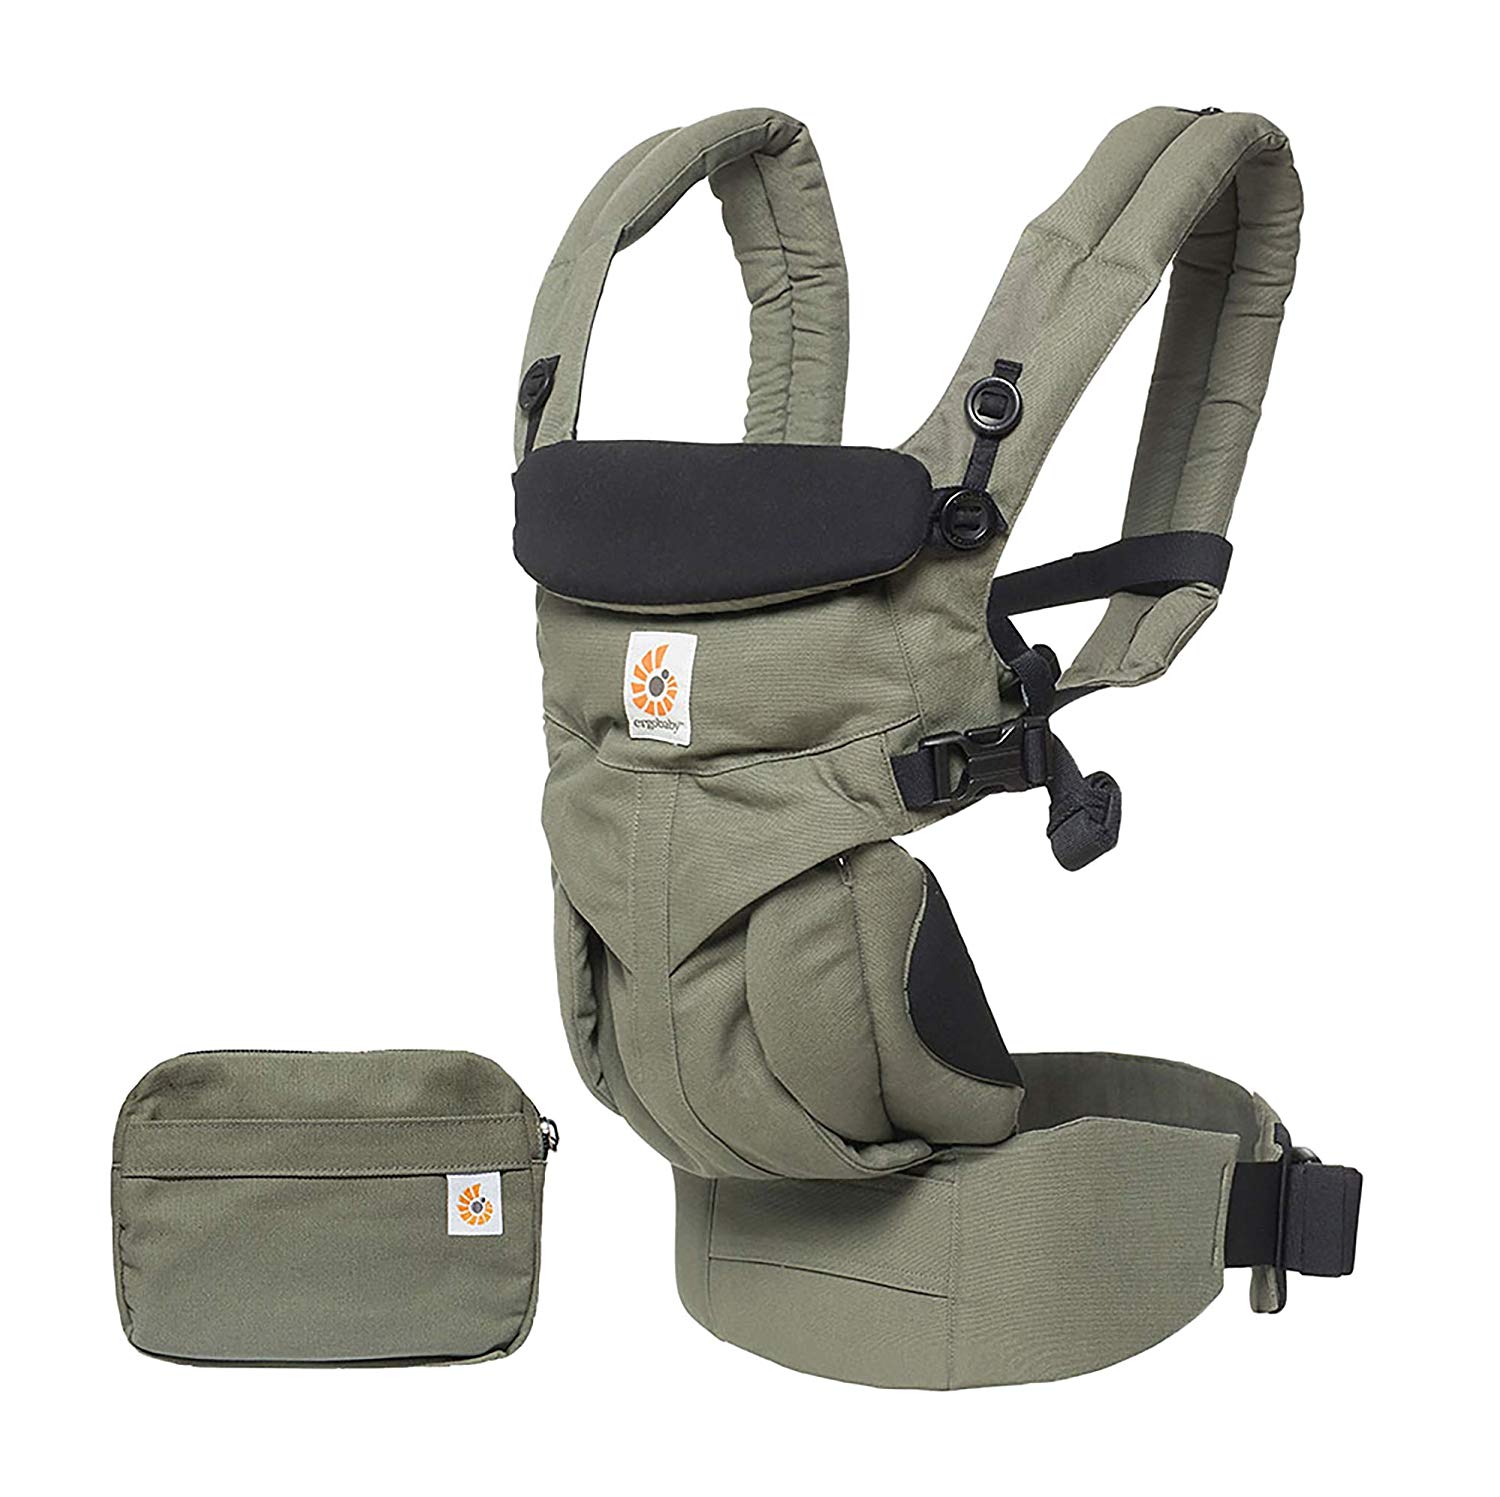 Ergobaby baby carrier for newborns from birth to 15kg, 4-position Omni 360 Khaki Green, made of cotton